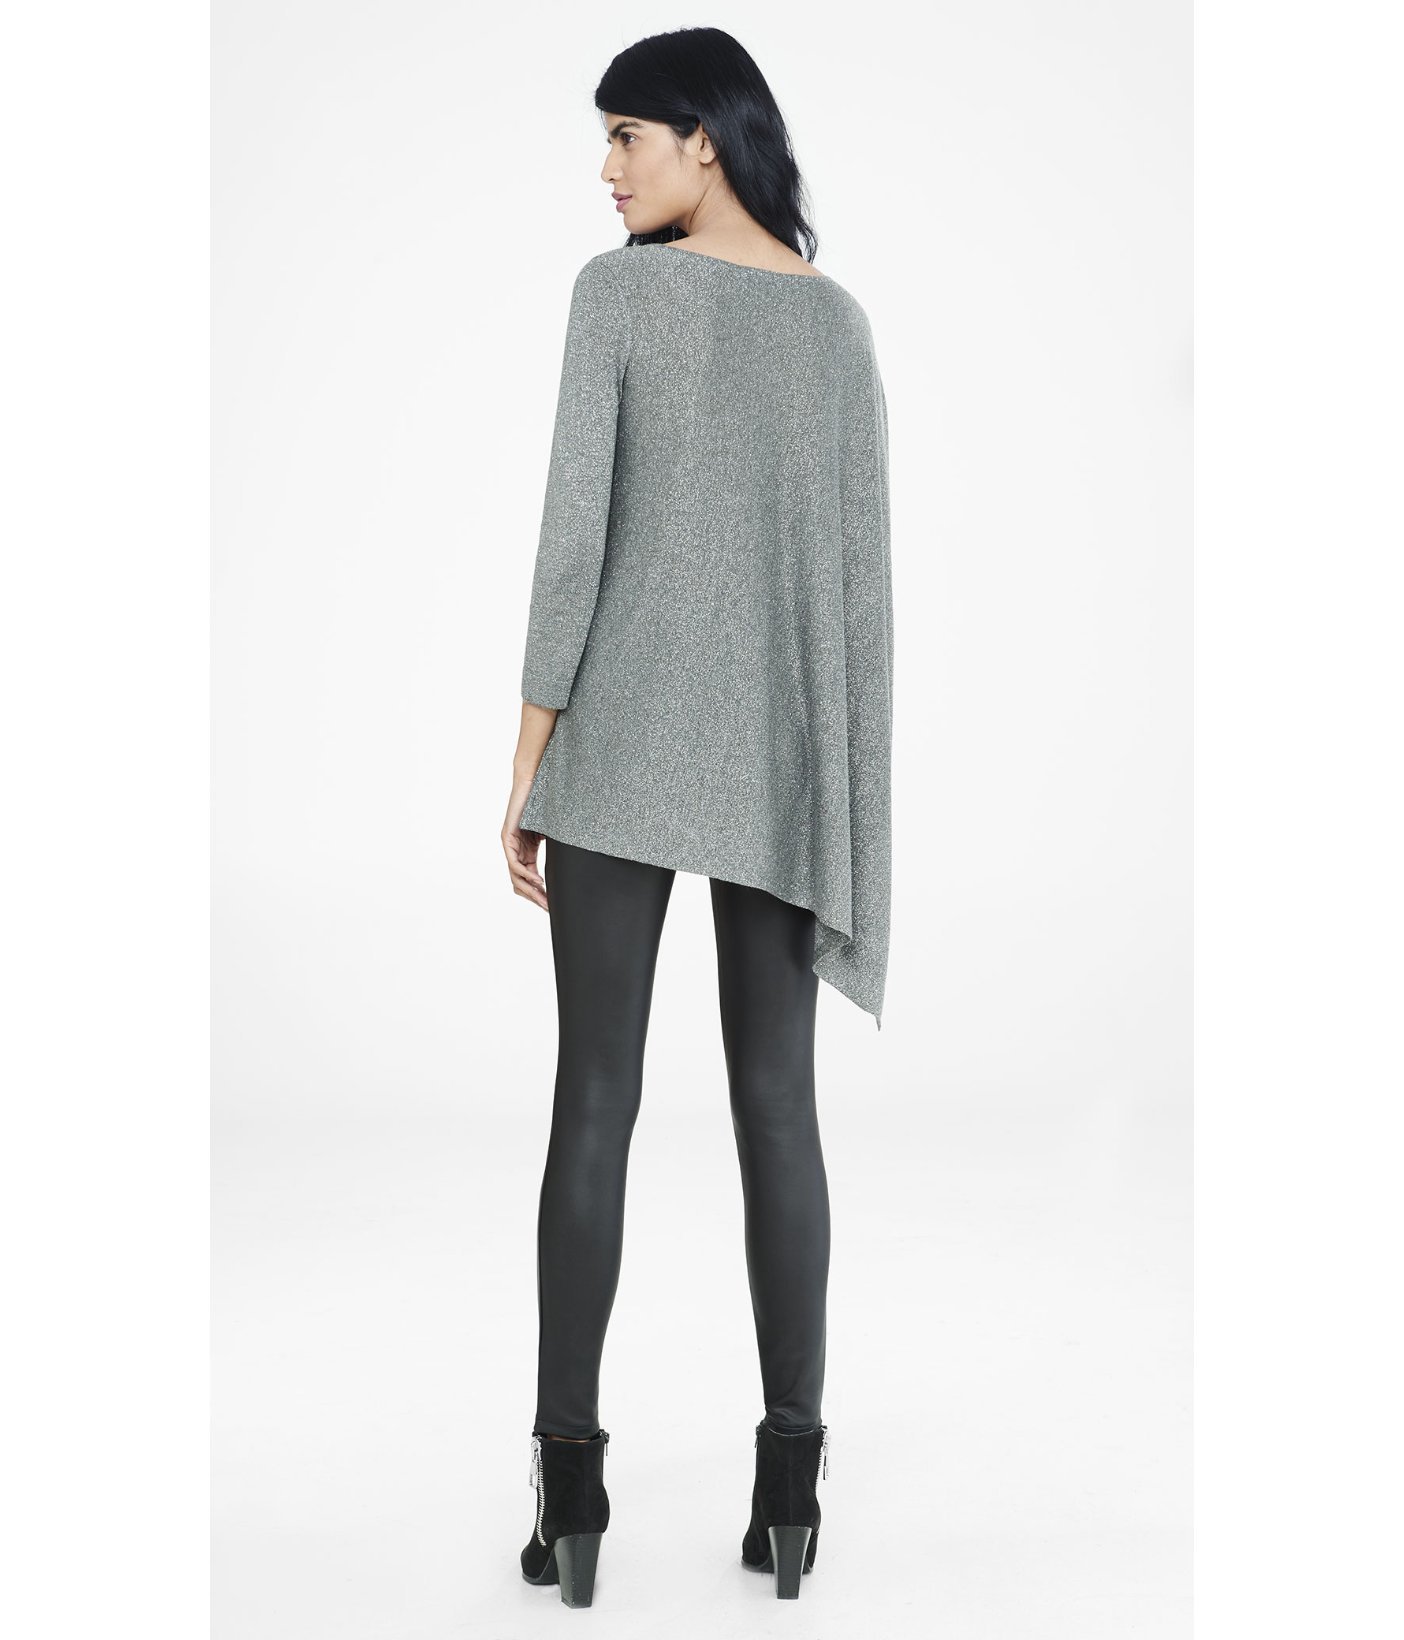 Express Metallic Extreme Asymmetrical Tunic Sweater in Gray | Lyst